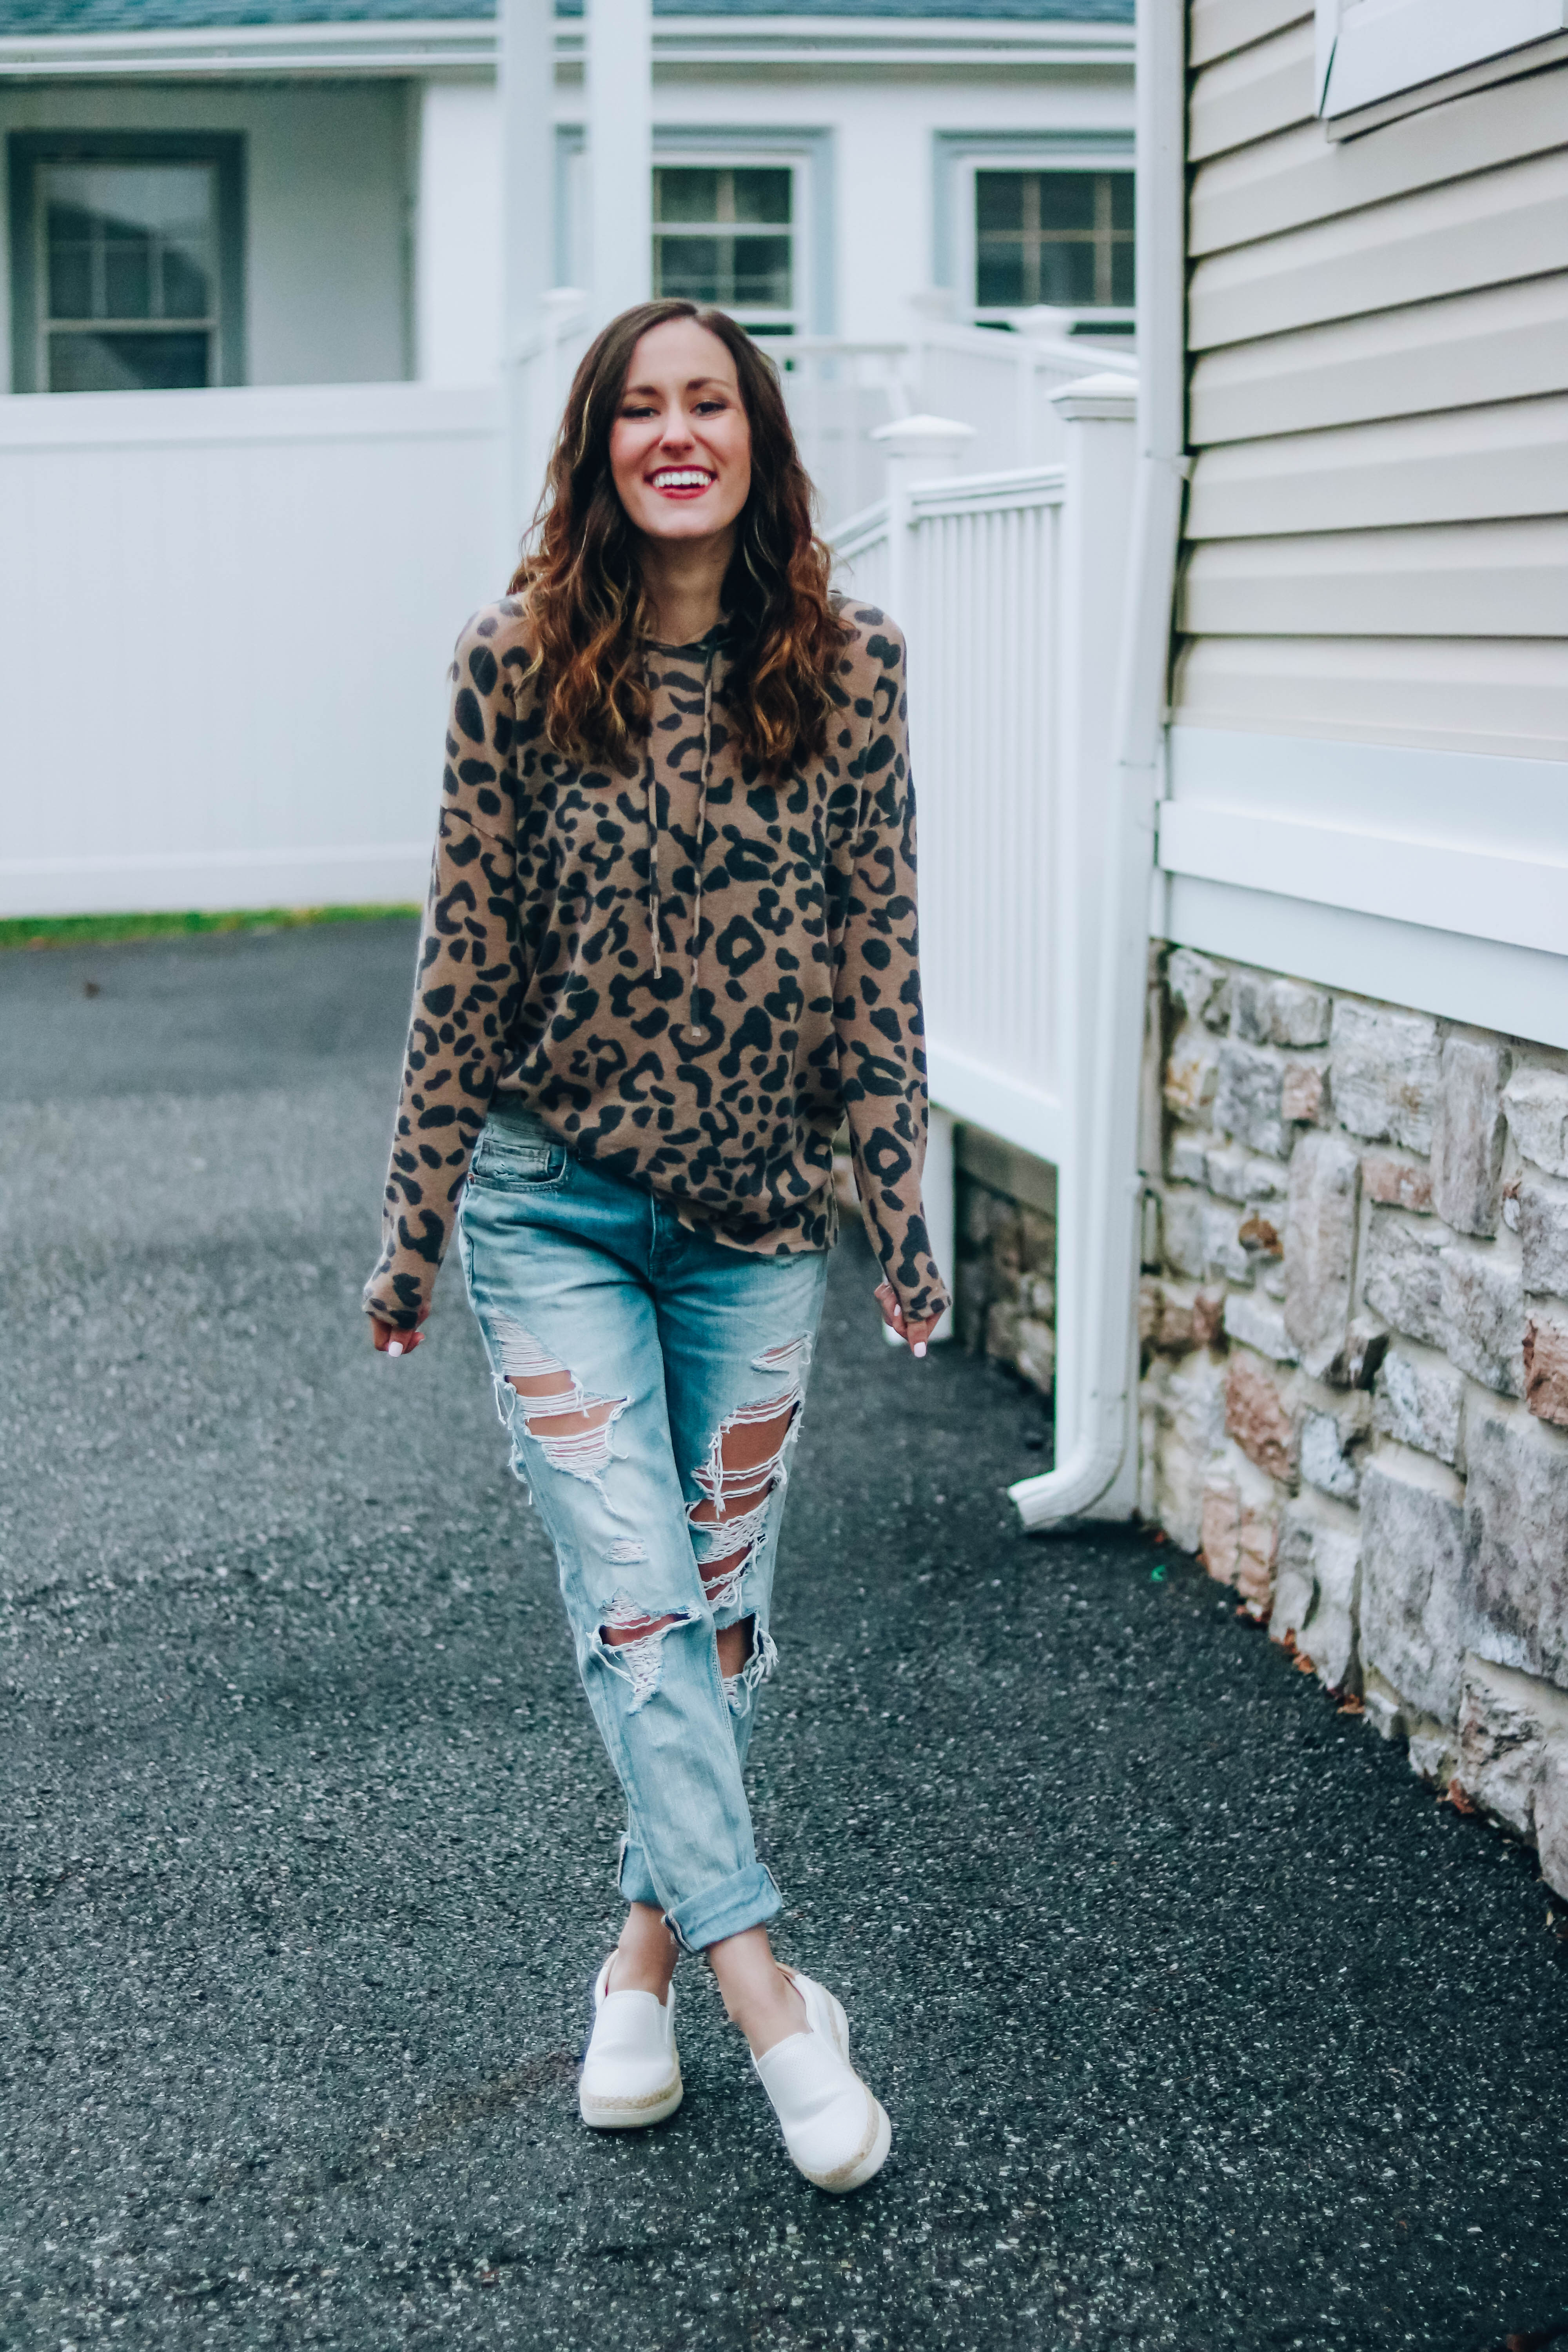 My New Mom Uniform - Leopard hoodie on Coming Up Roses